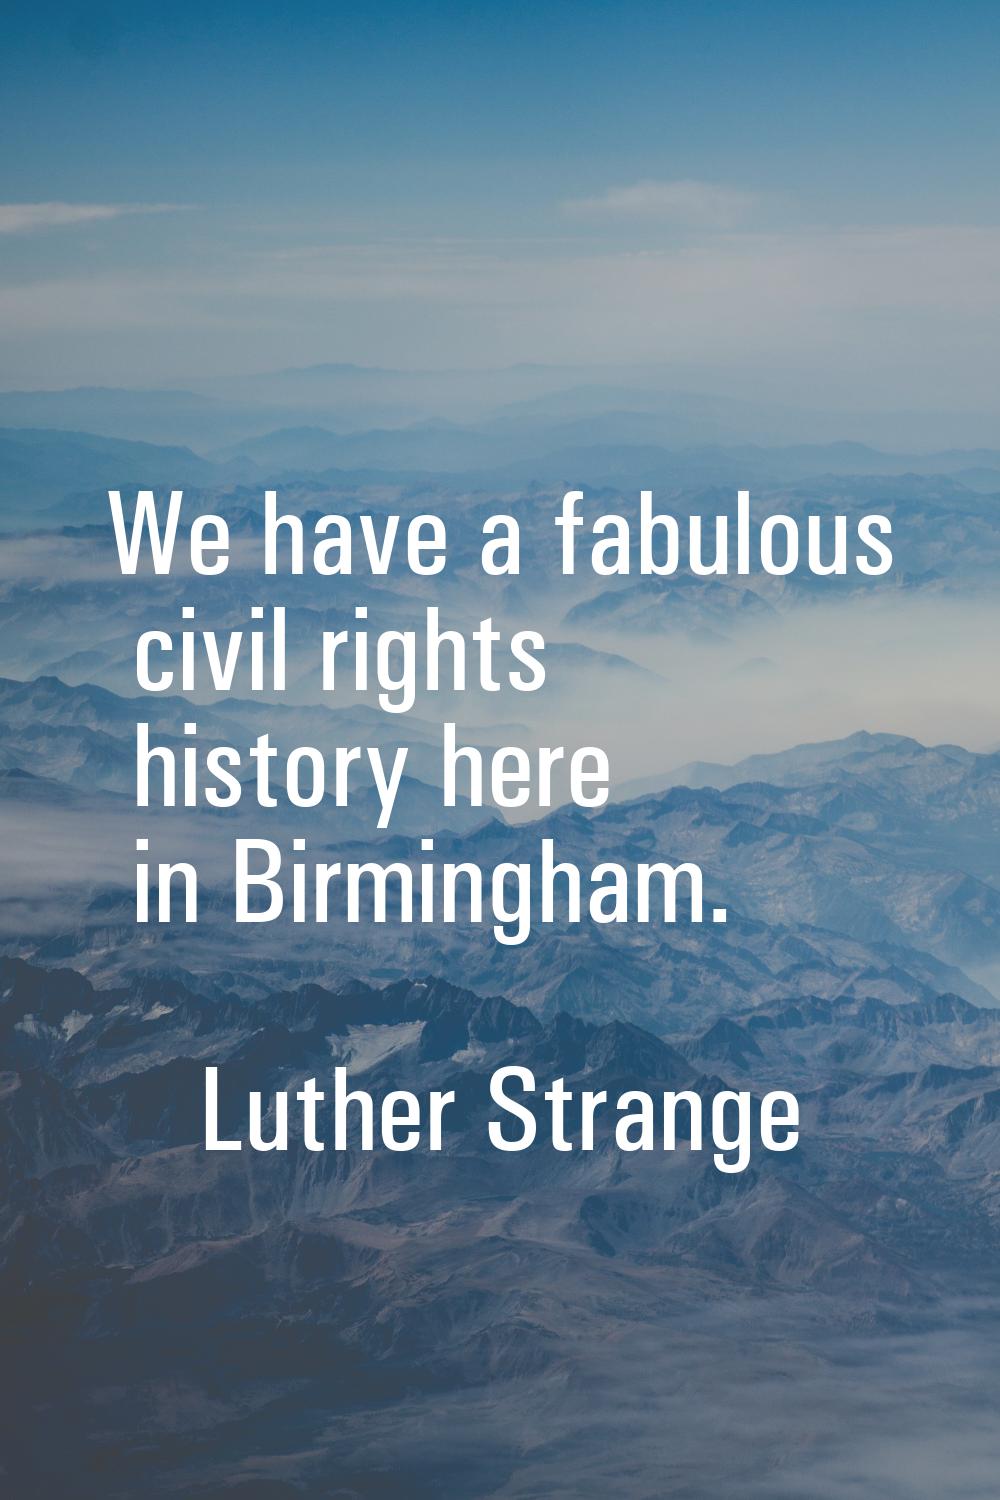 We have a fabulous civil rights history here in Birmingham.